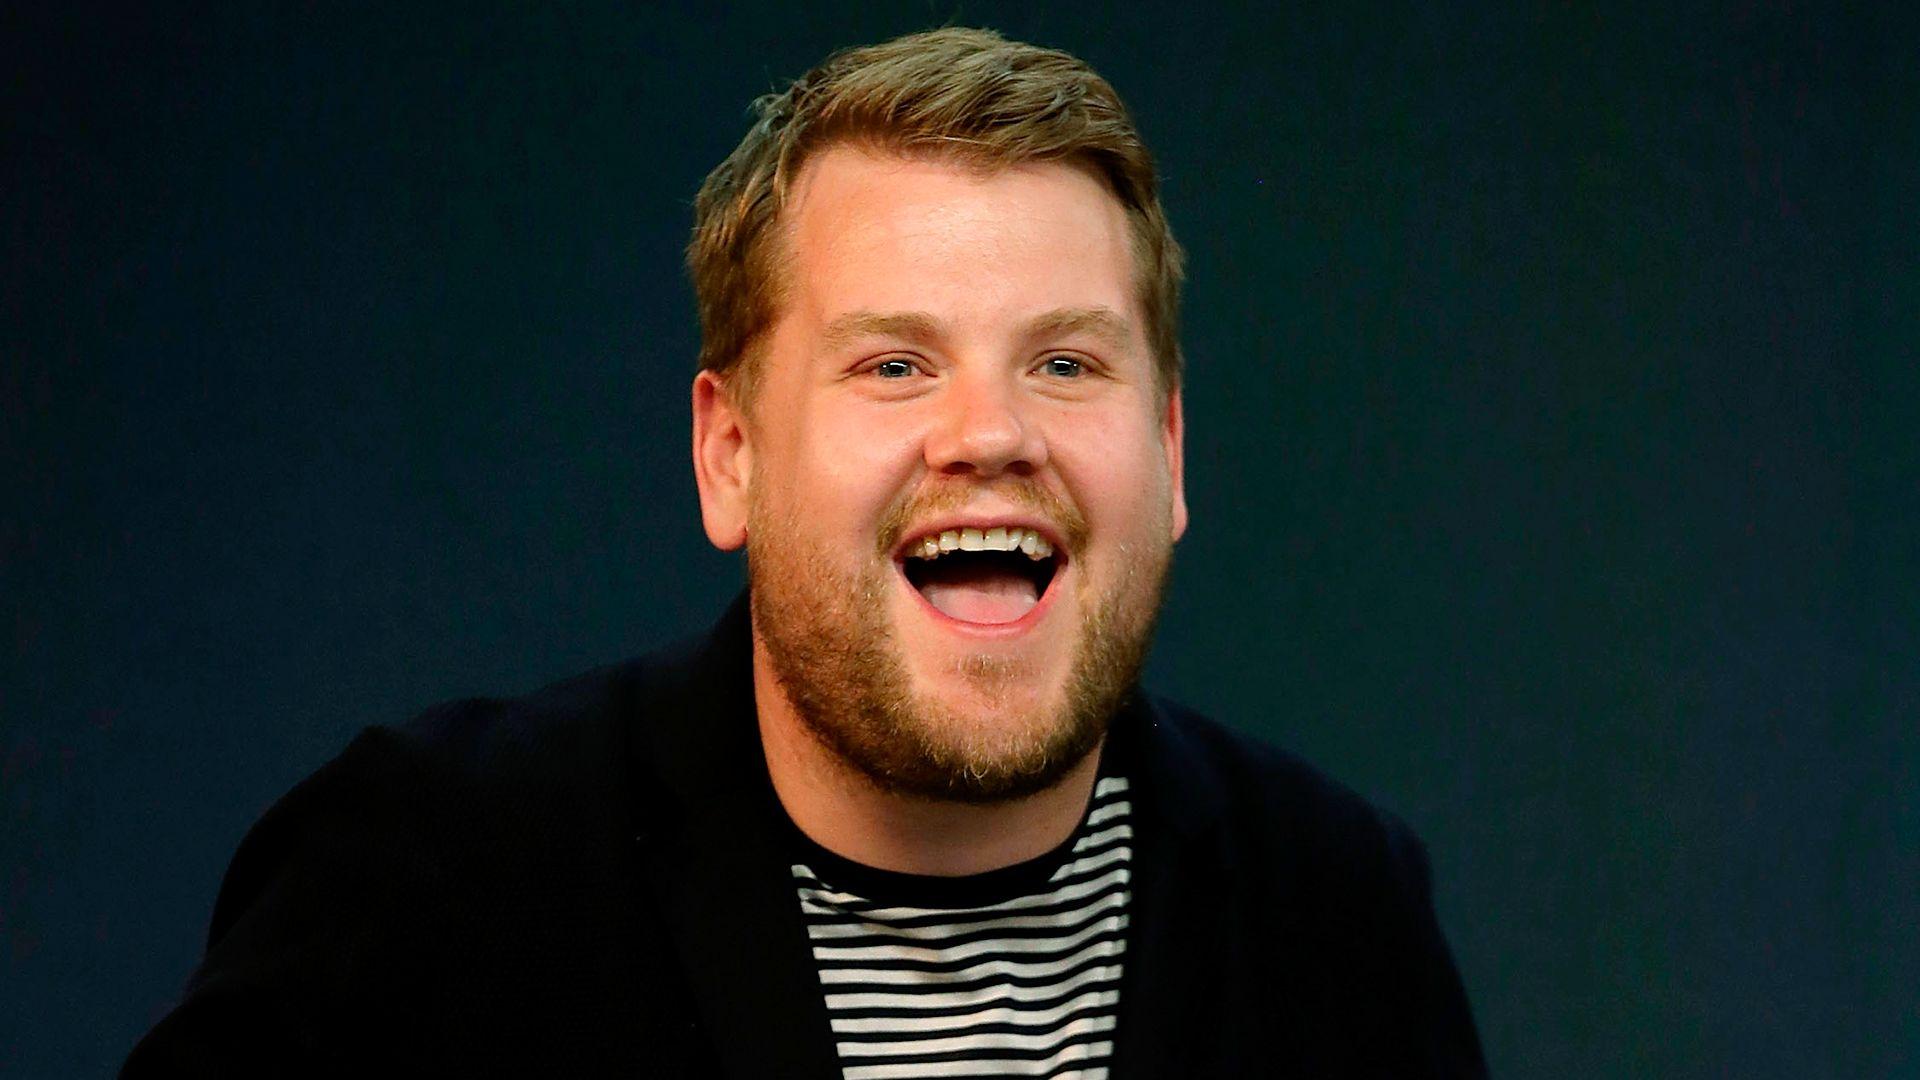 CBS Pushes James Corden's Debut On 'Late Late Show' To March 23